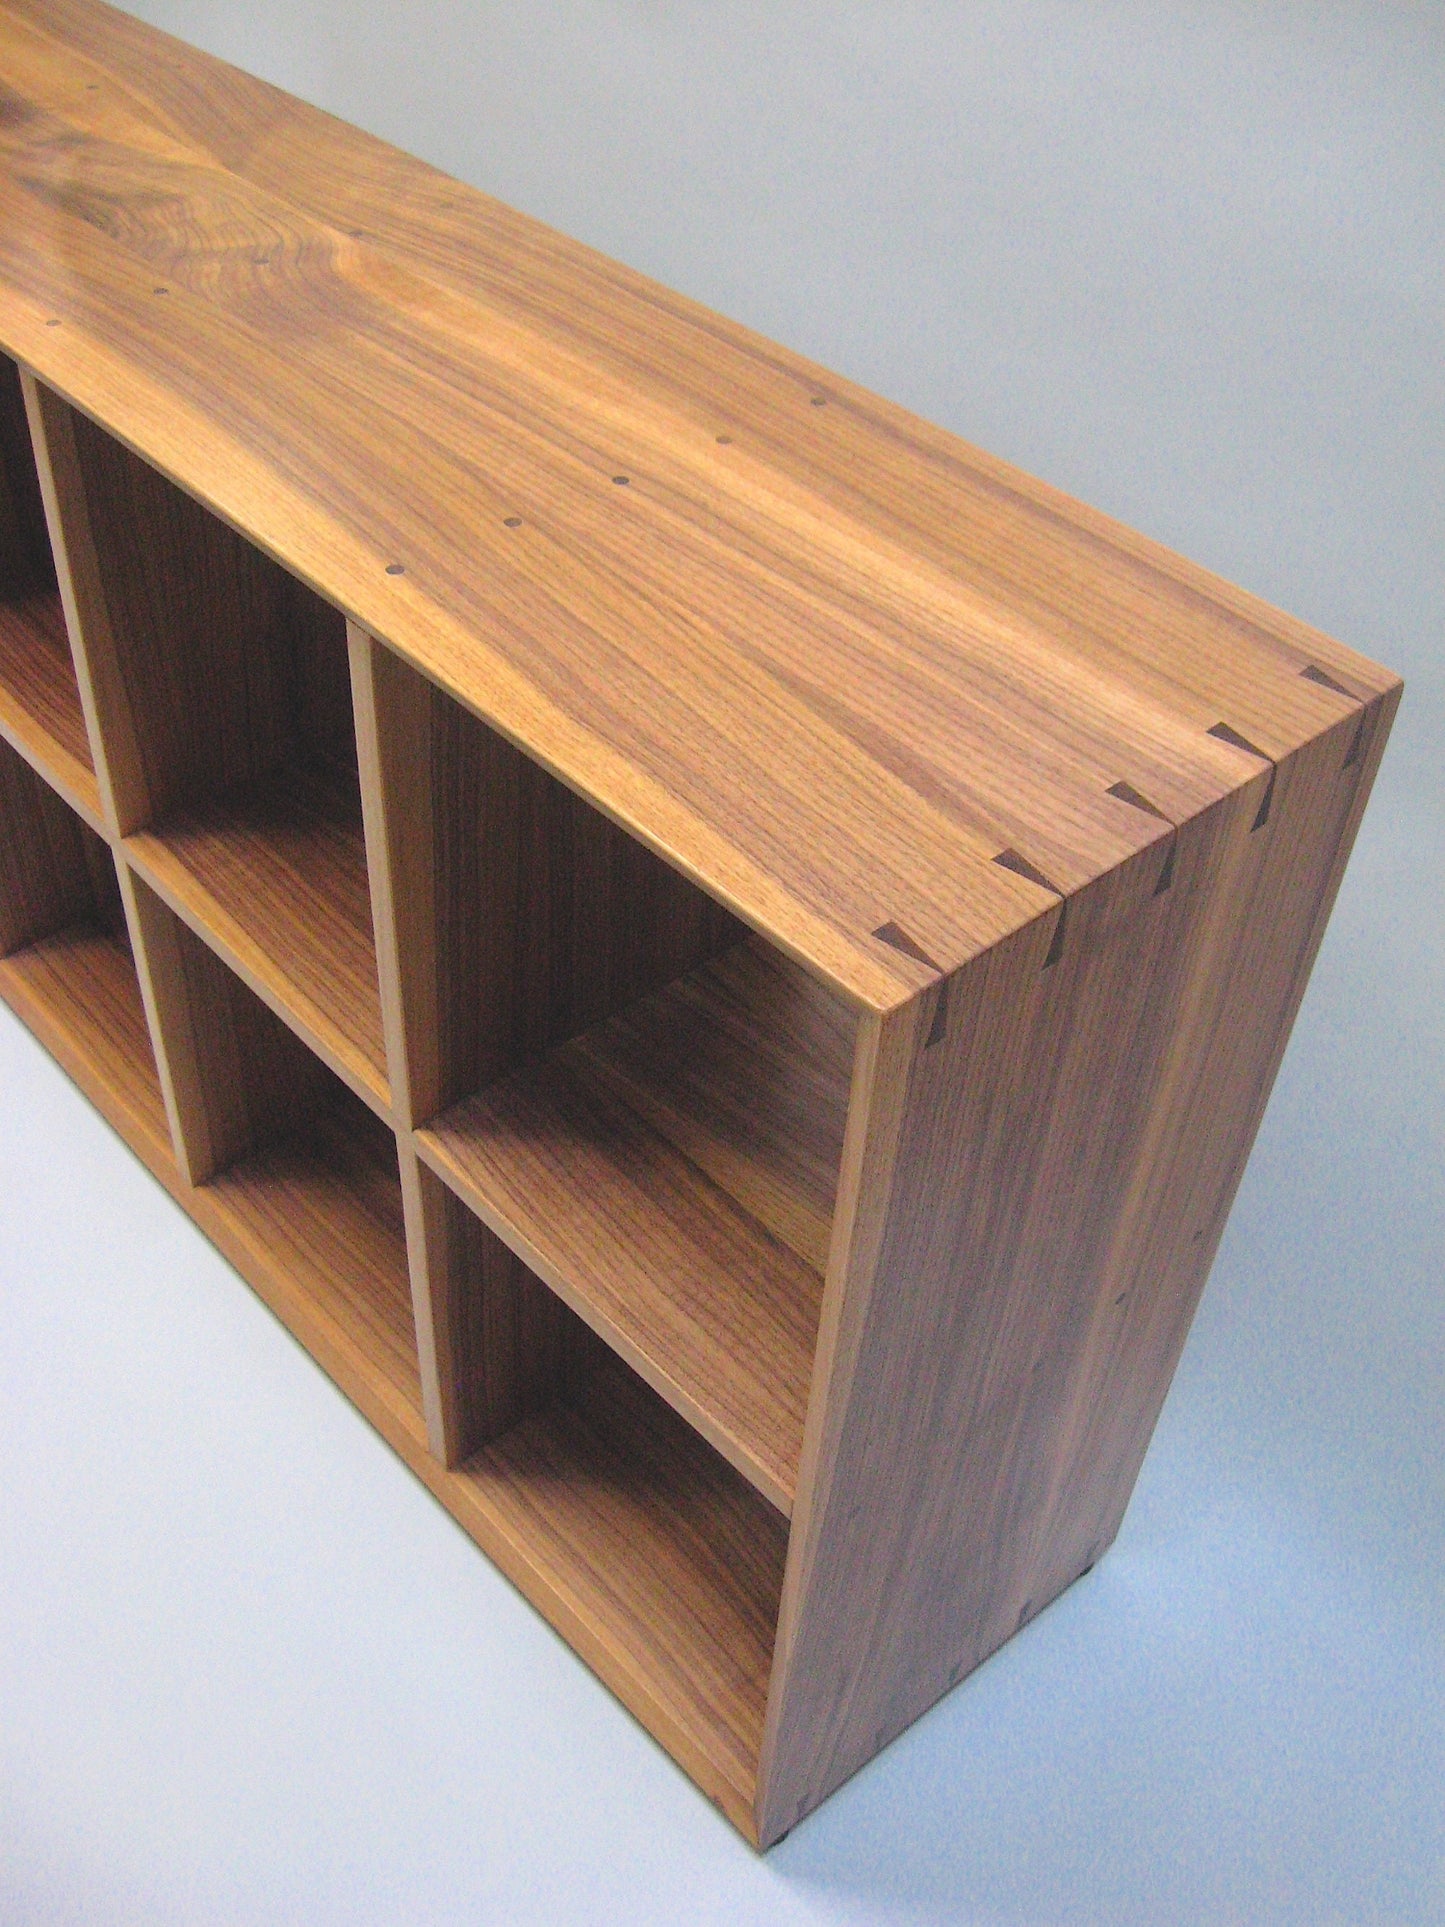 Quartered Walnut Bookcase with Open Back